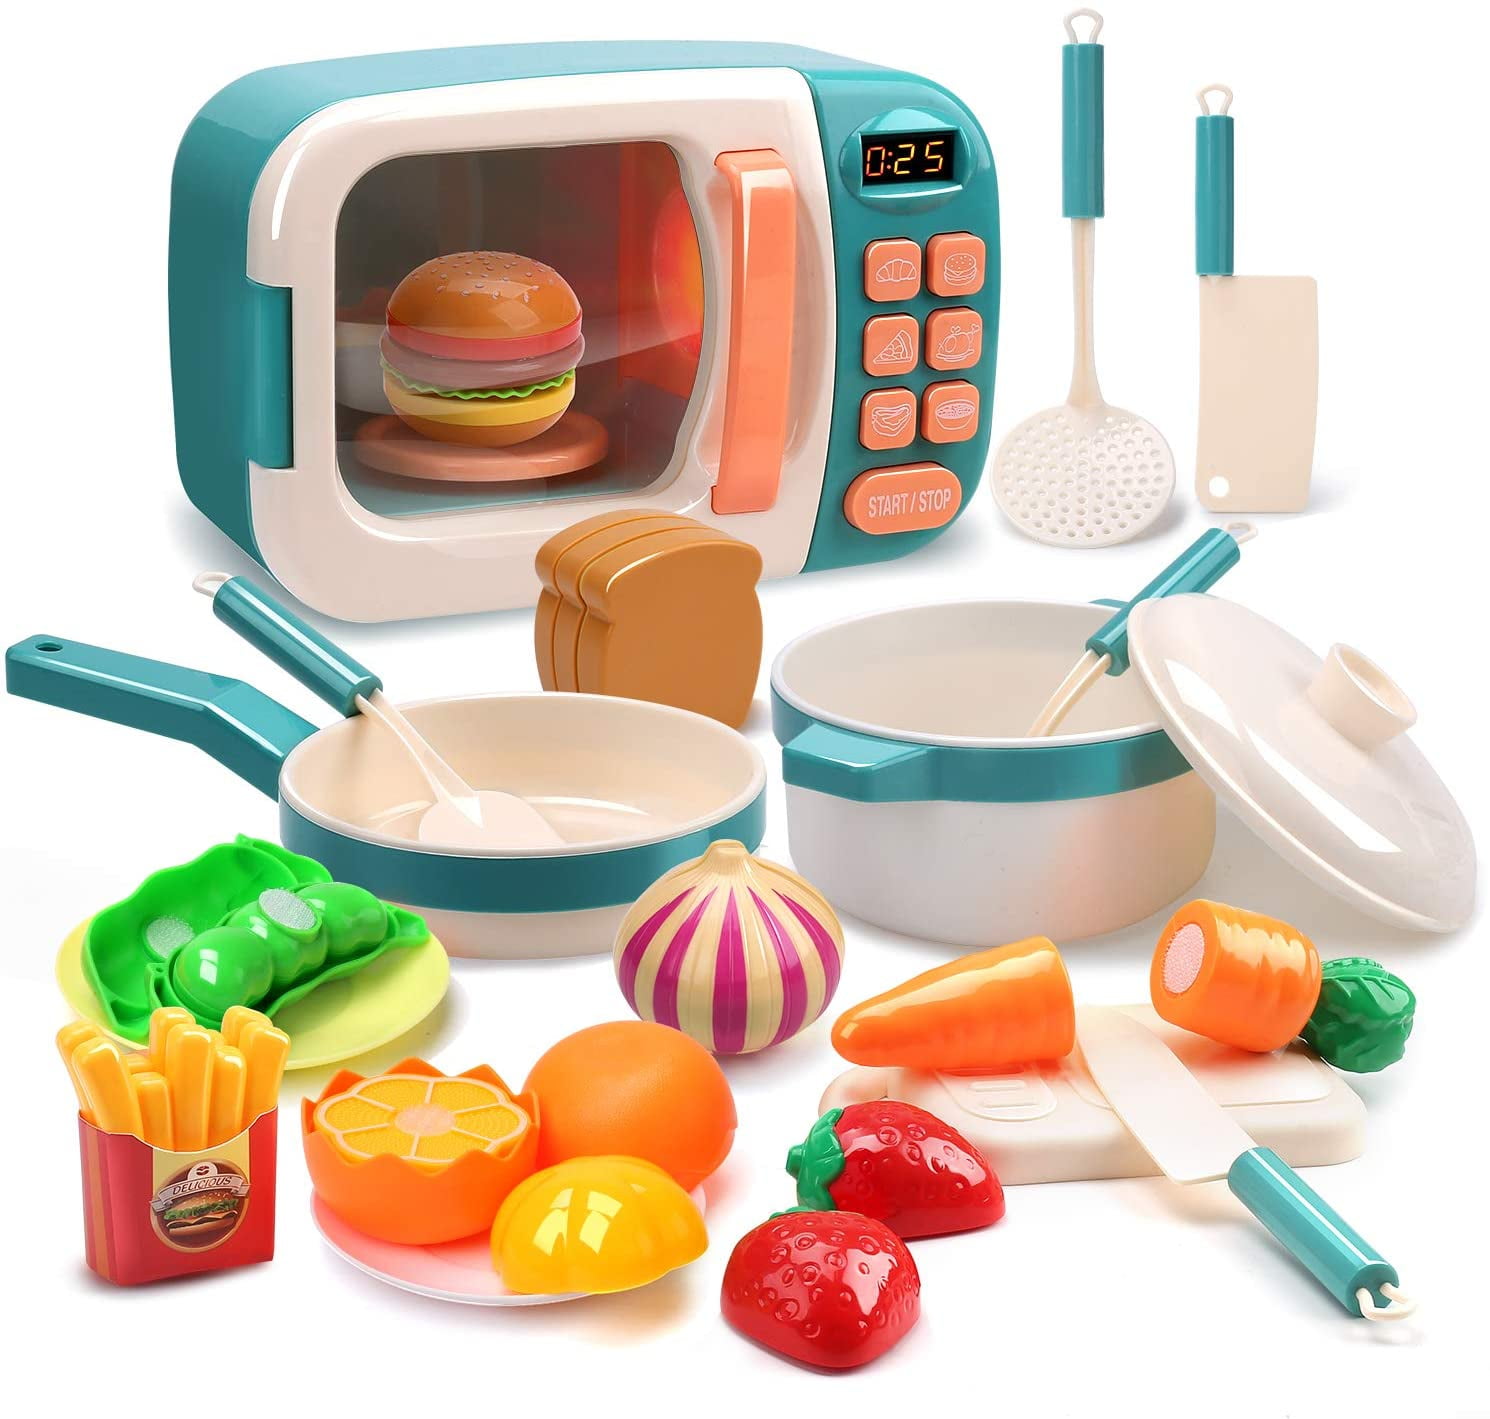 Kids Kitchenware Cooking Set Play For Toddler Pretend Play Toy Kitchen Playset 